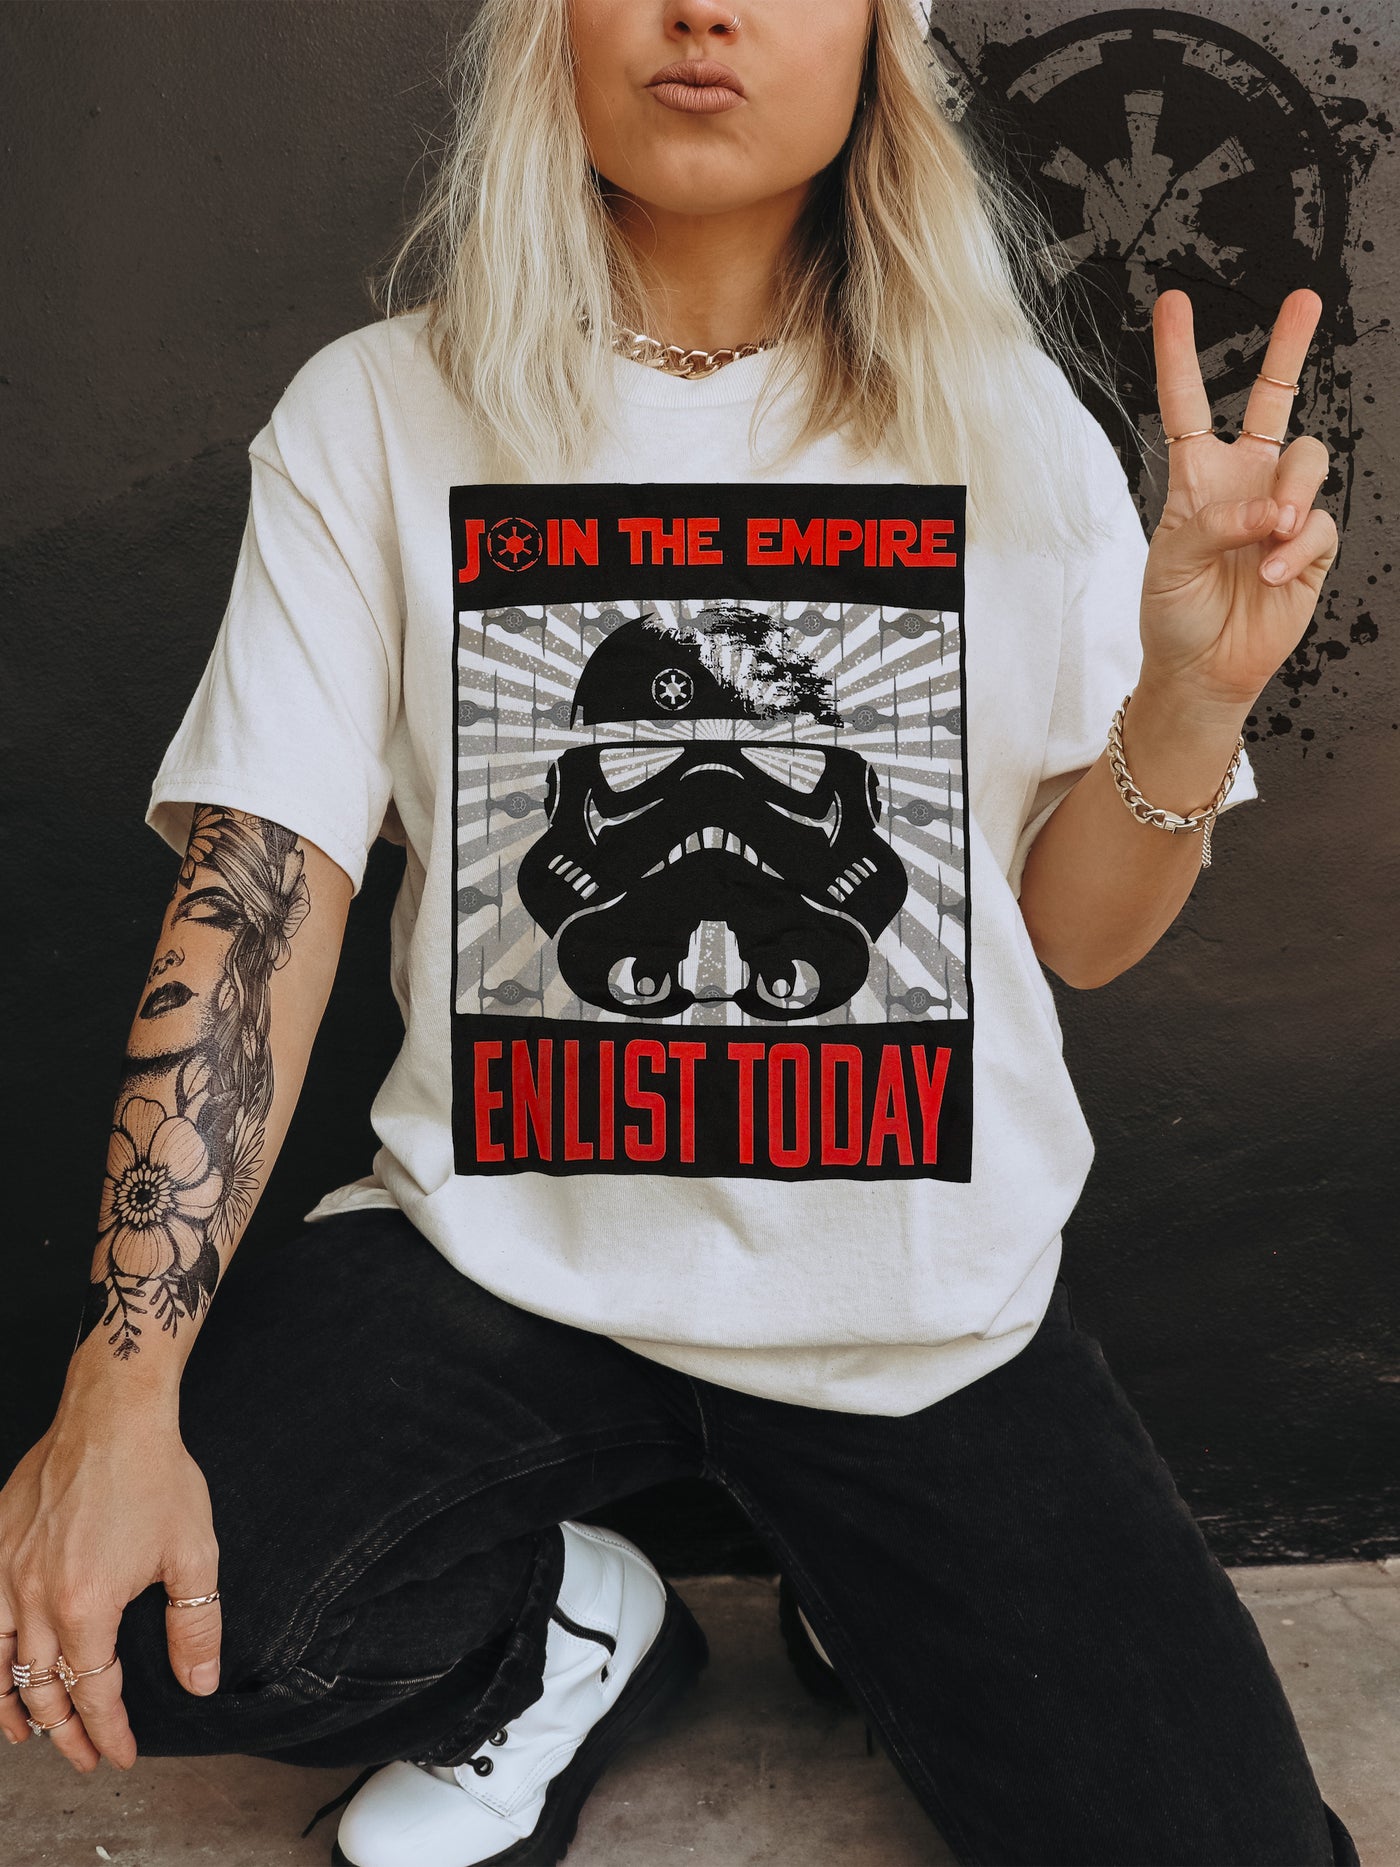 Join The Empire, Enlist Today Shirt